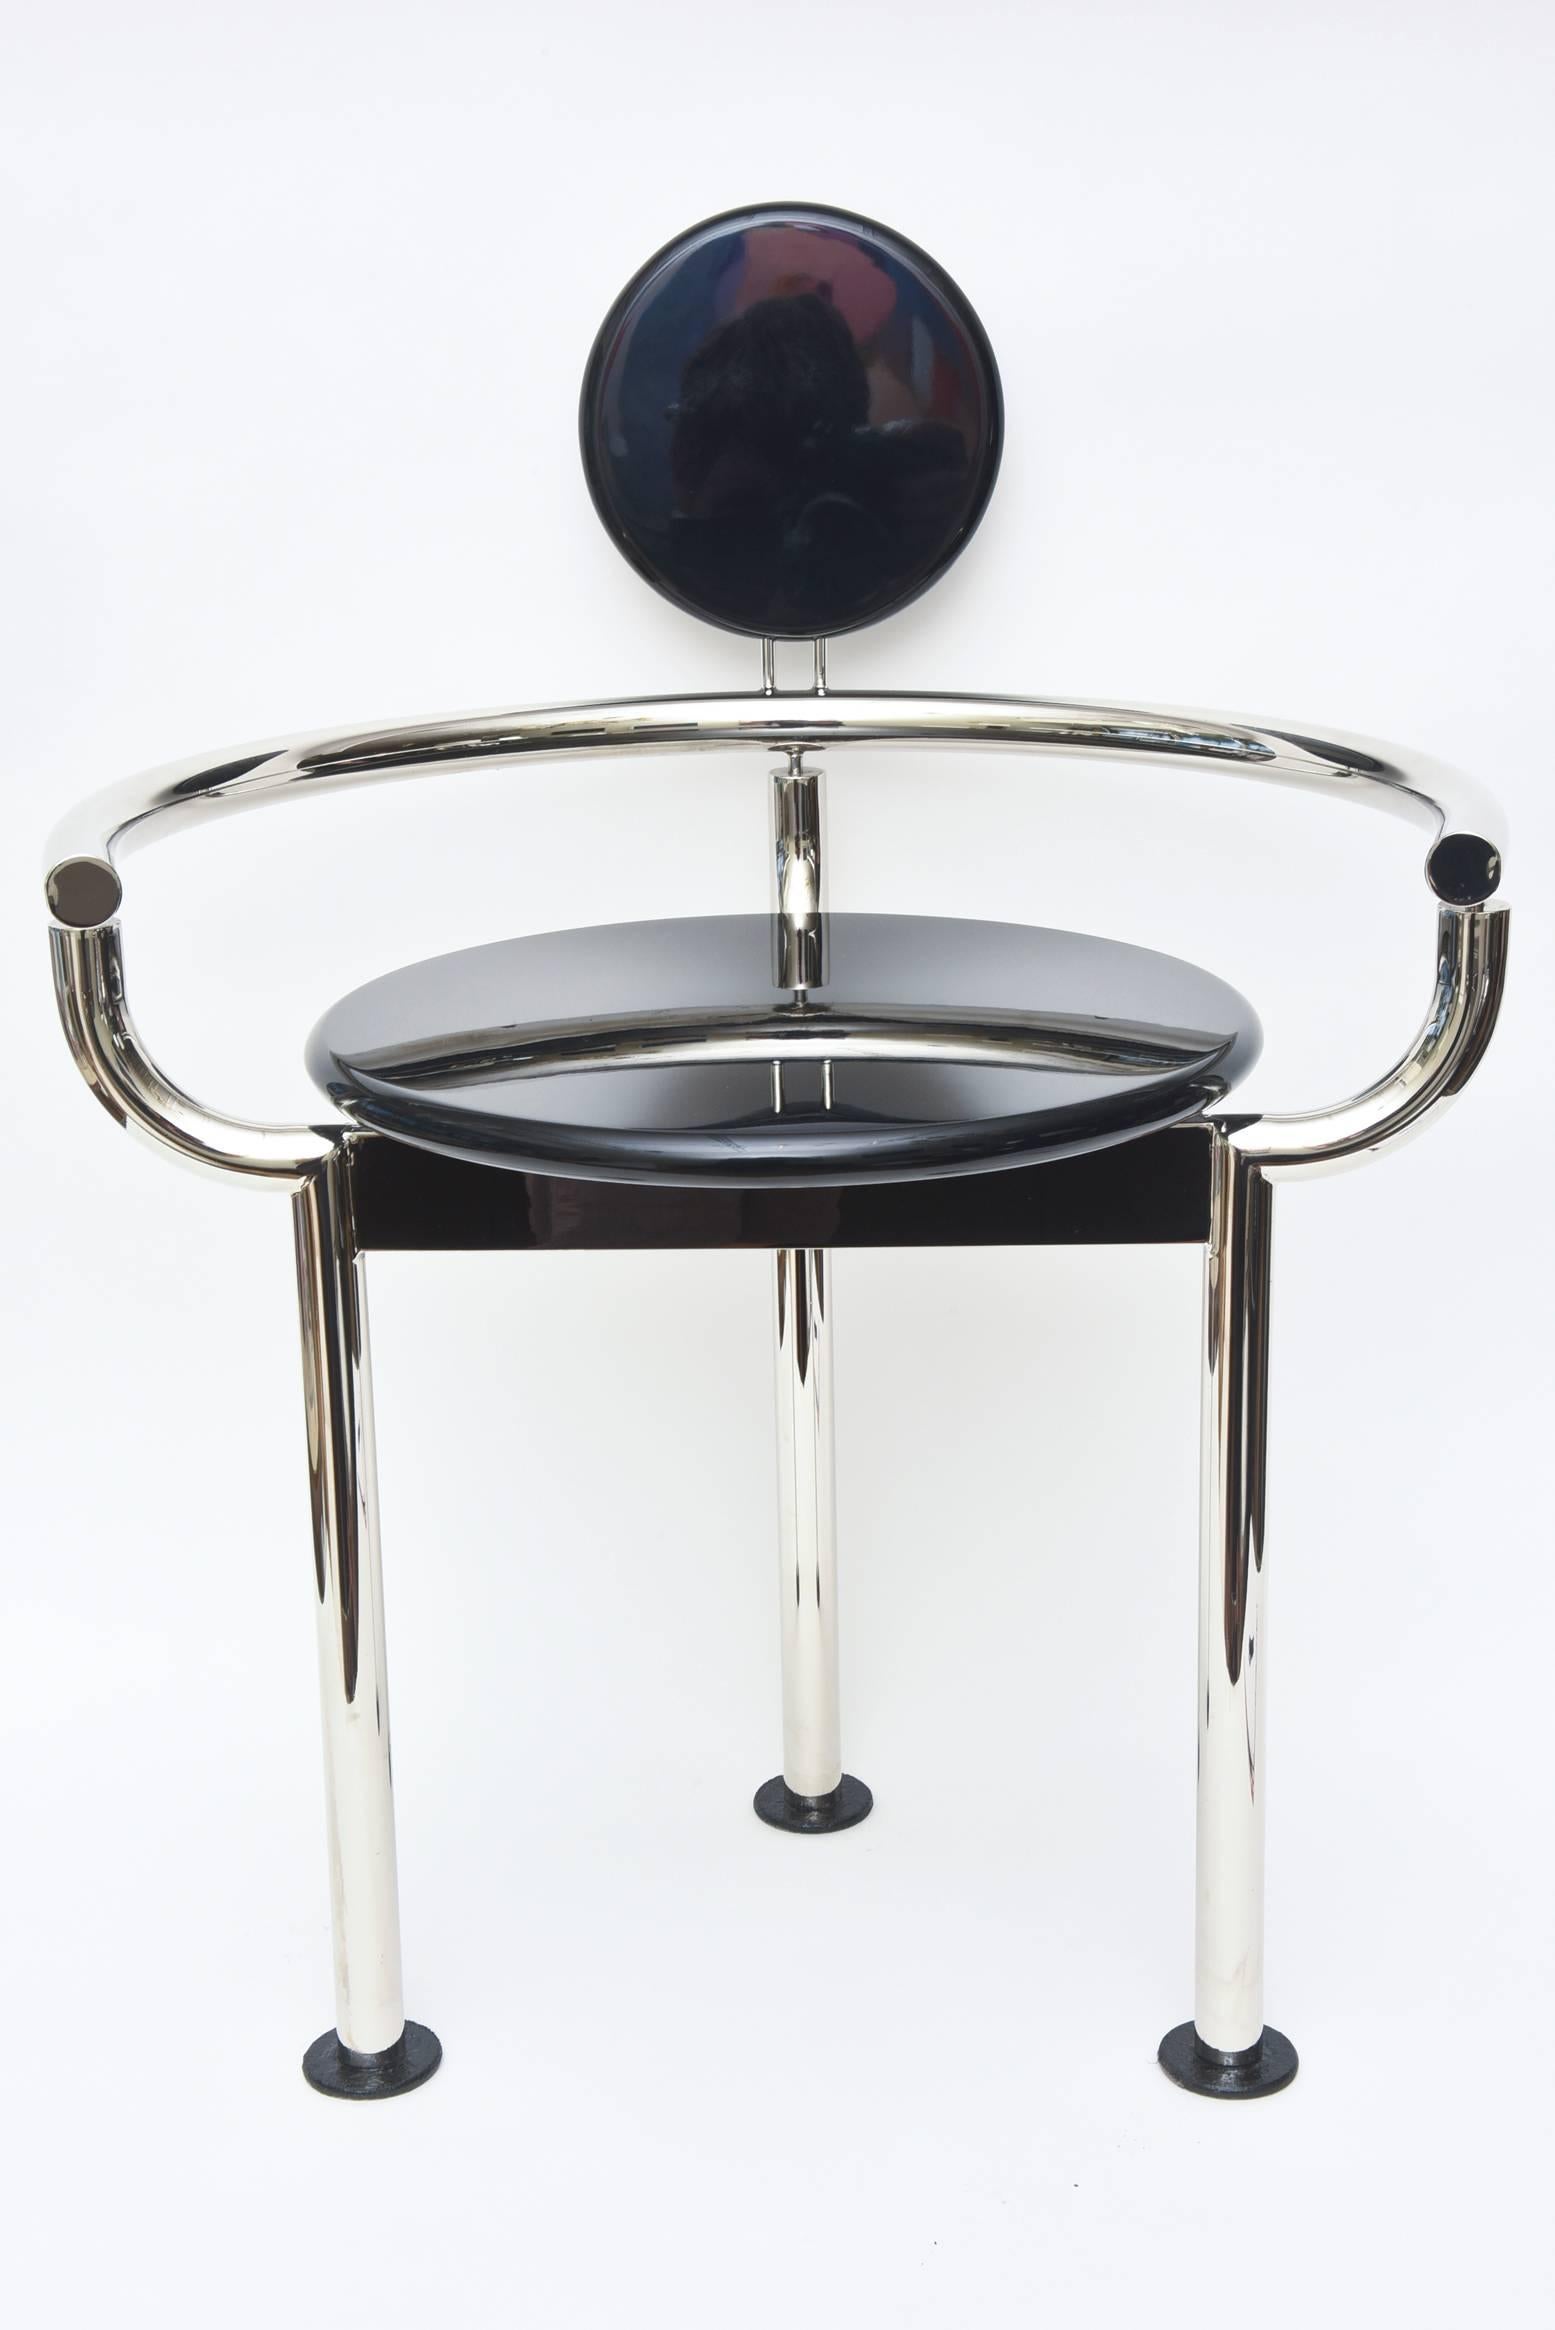 Memphis style meets art deco in this wonderful theatrical side chair that could be also used for a vanity chair or an accent chair.
The frame has been newly chromed and the circular pieces are black lacquered wood that has been restored.
     